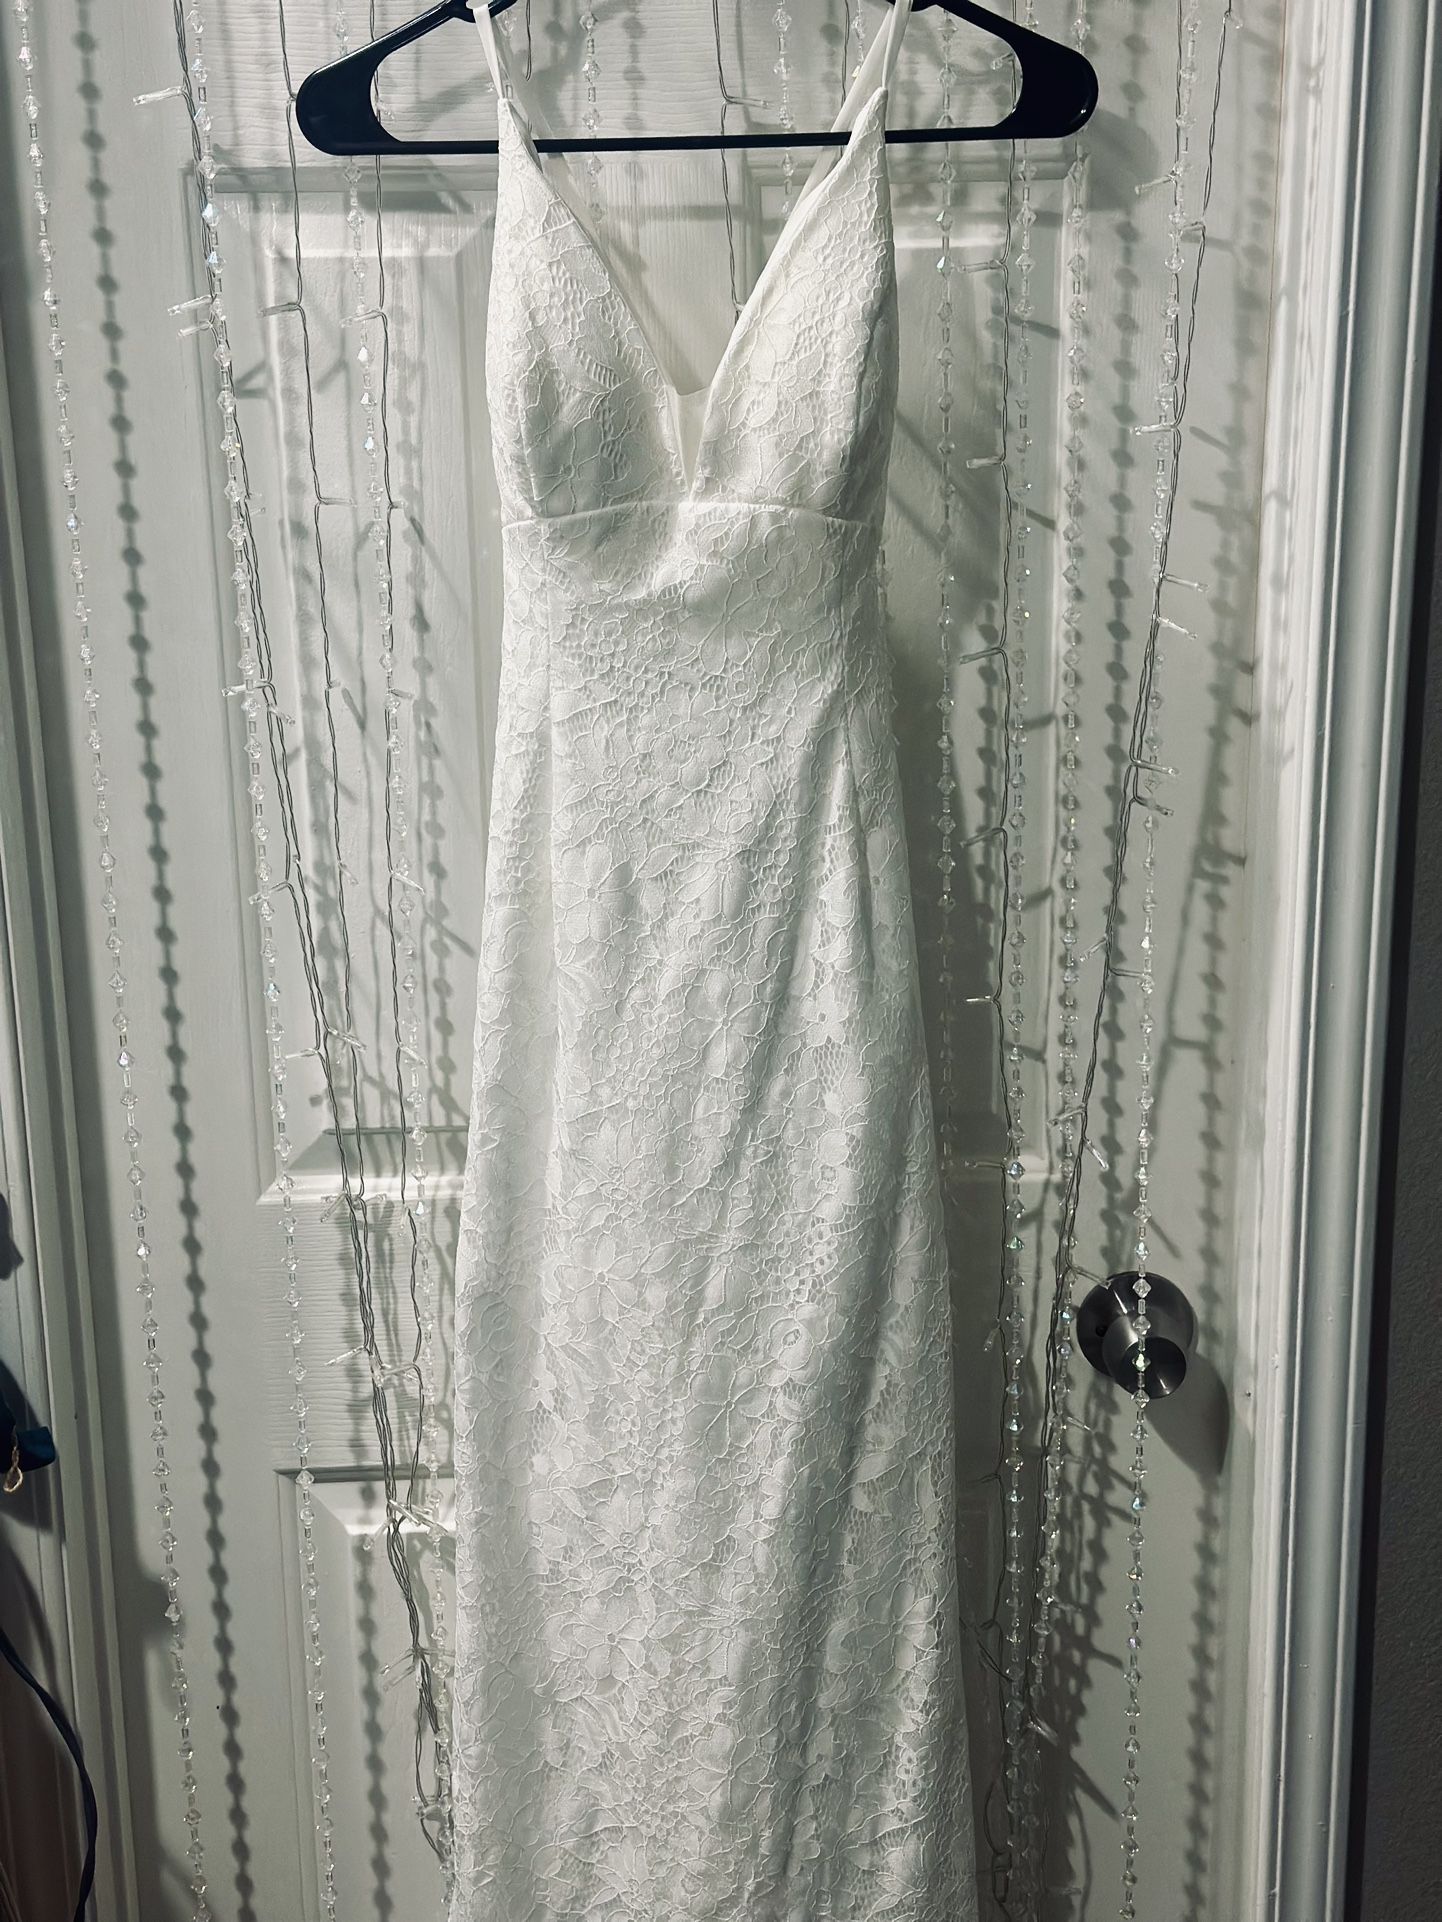 Super Simple Yet Extremely Beautiful White Lace Dress